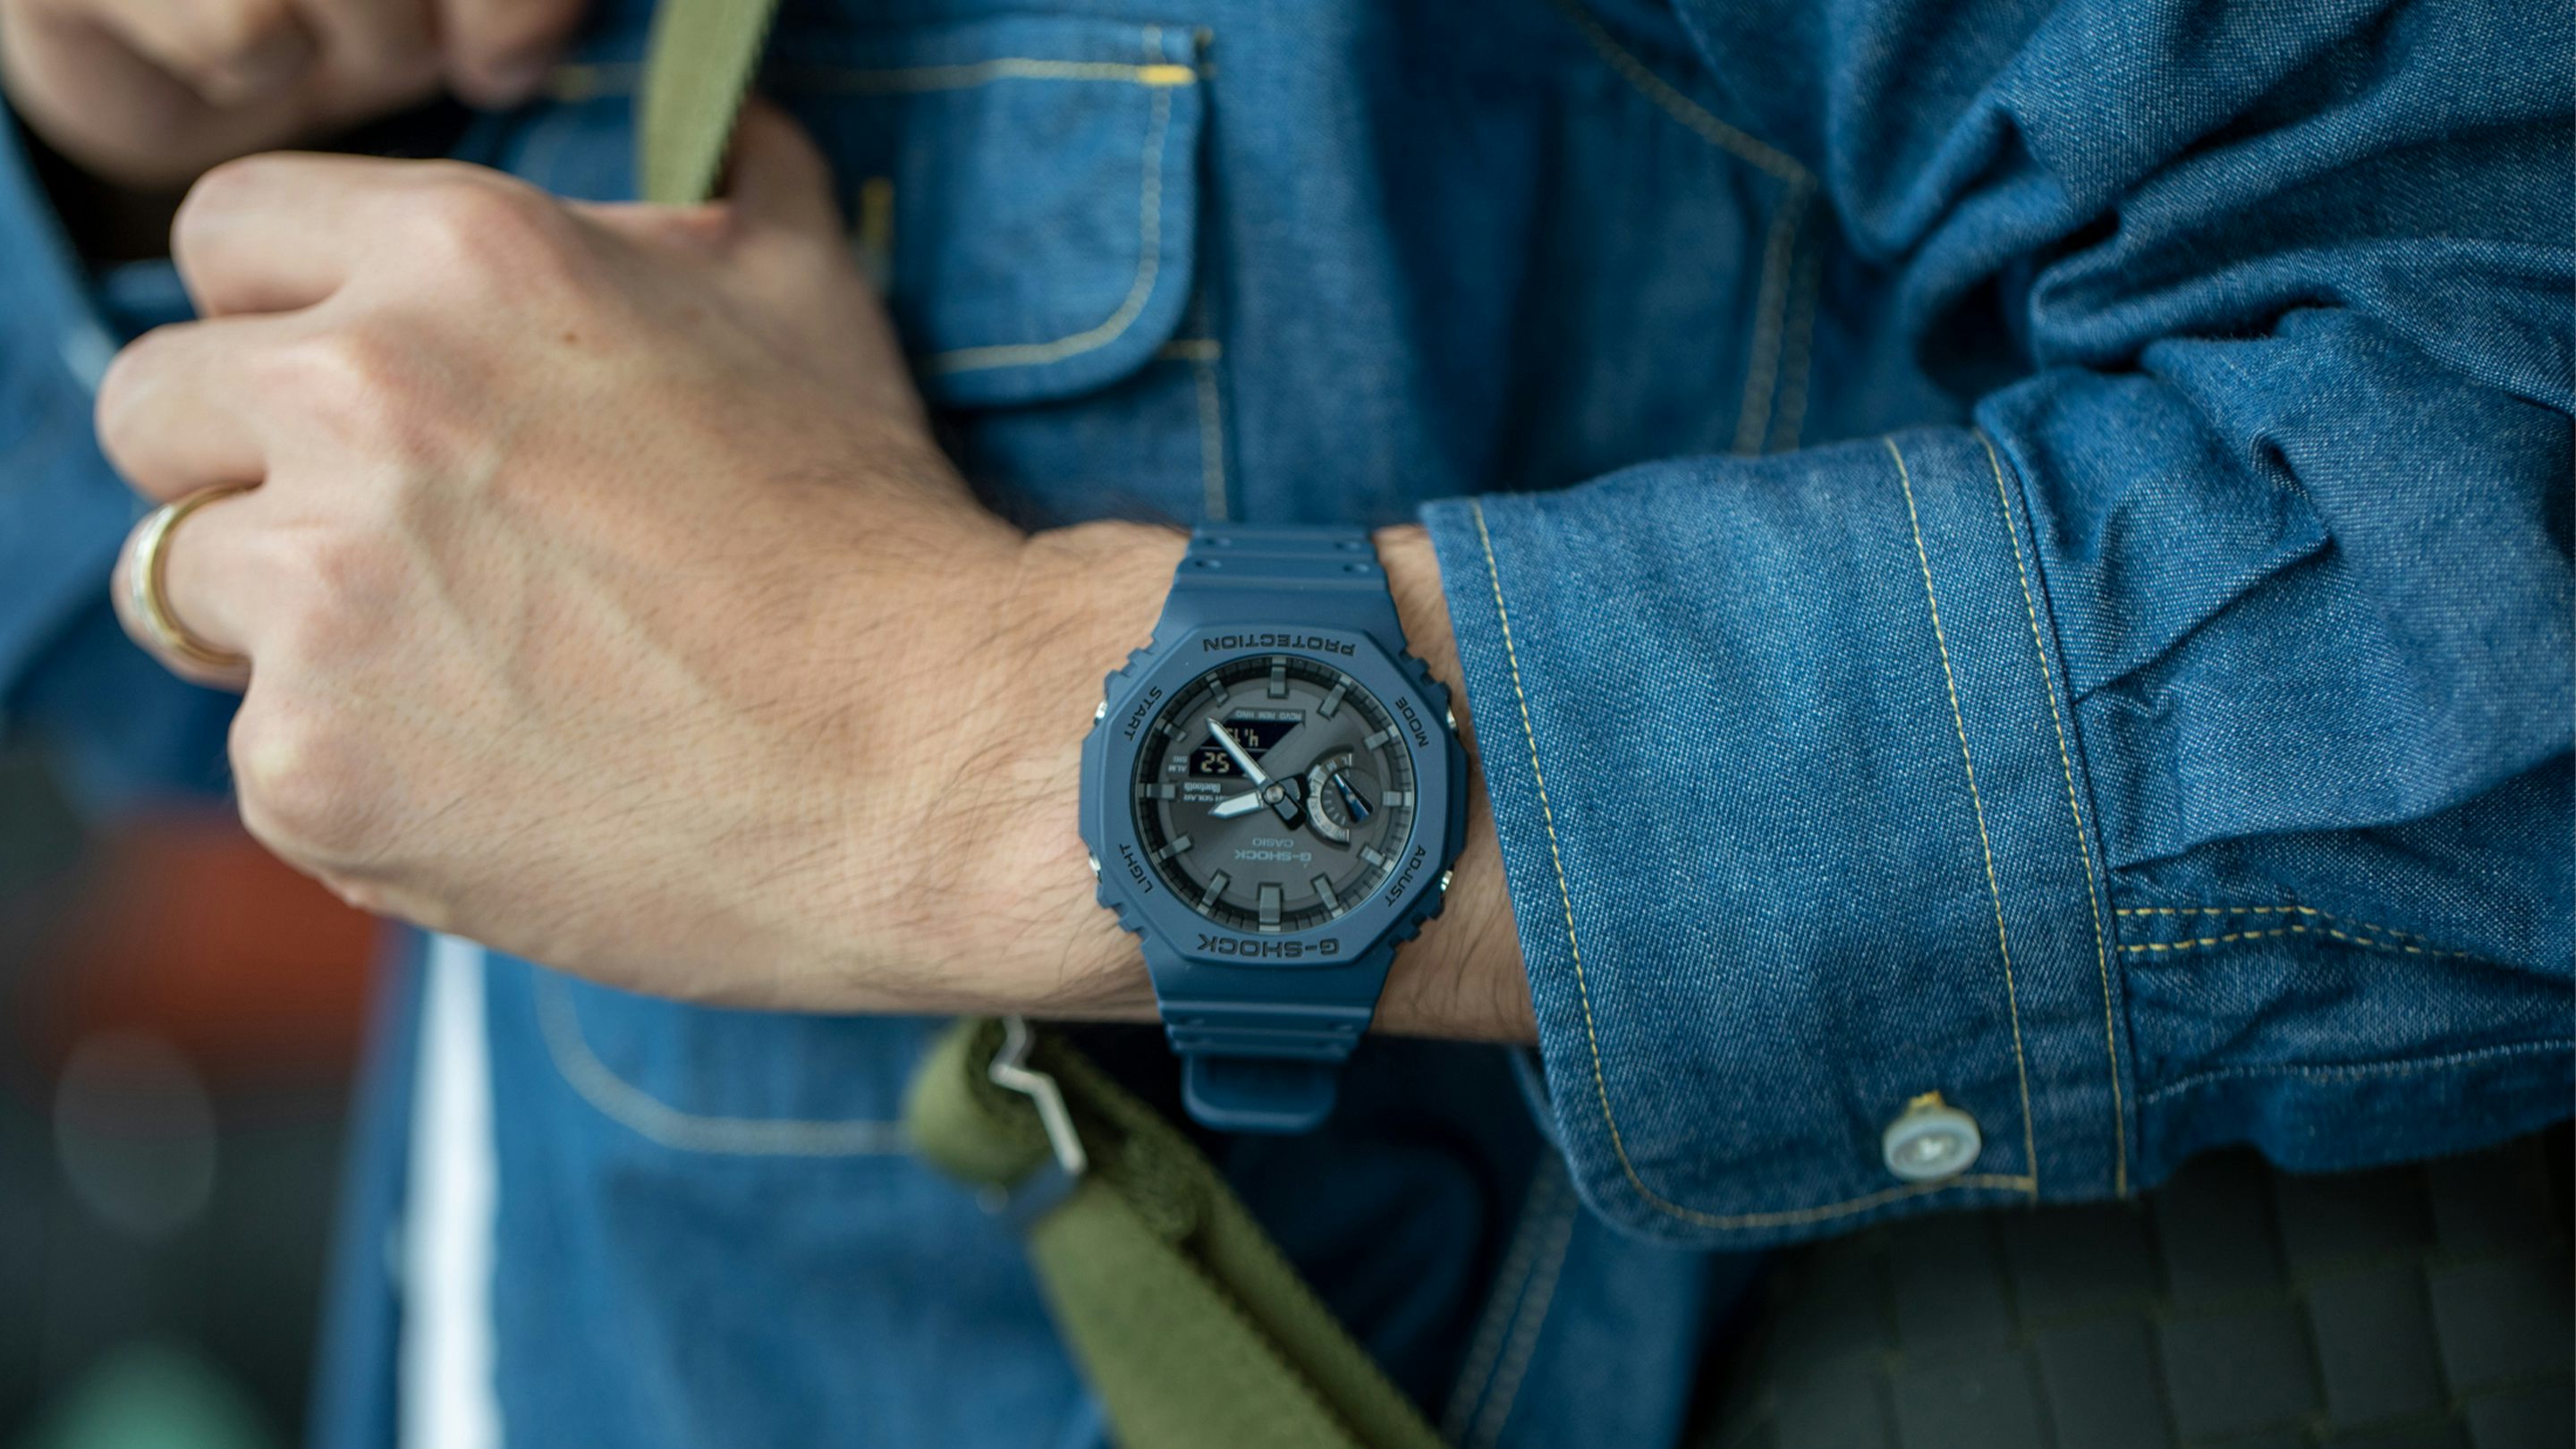 The new GA-B2100 To Design G-Shock Serious CasiOak Functionality Adds The